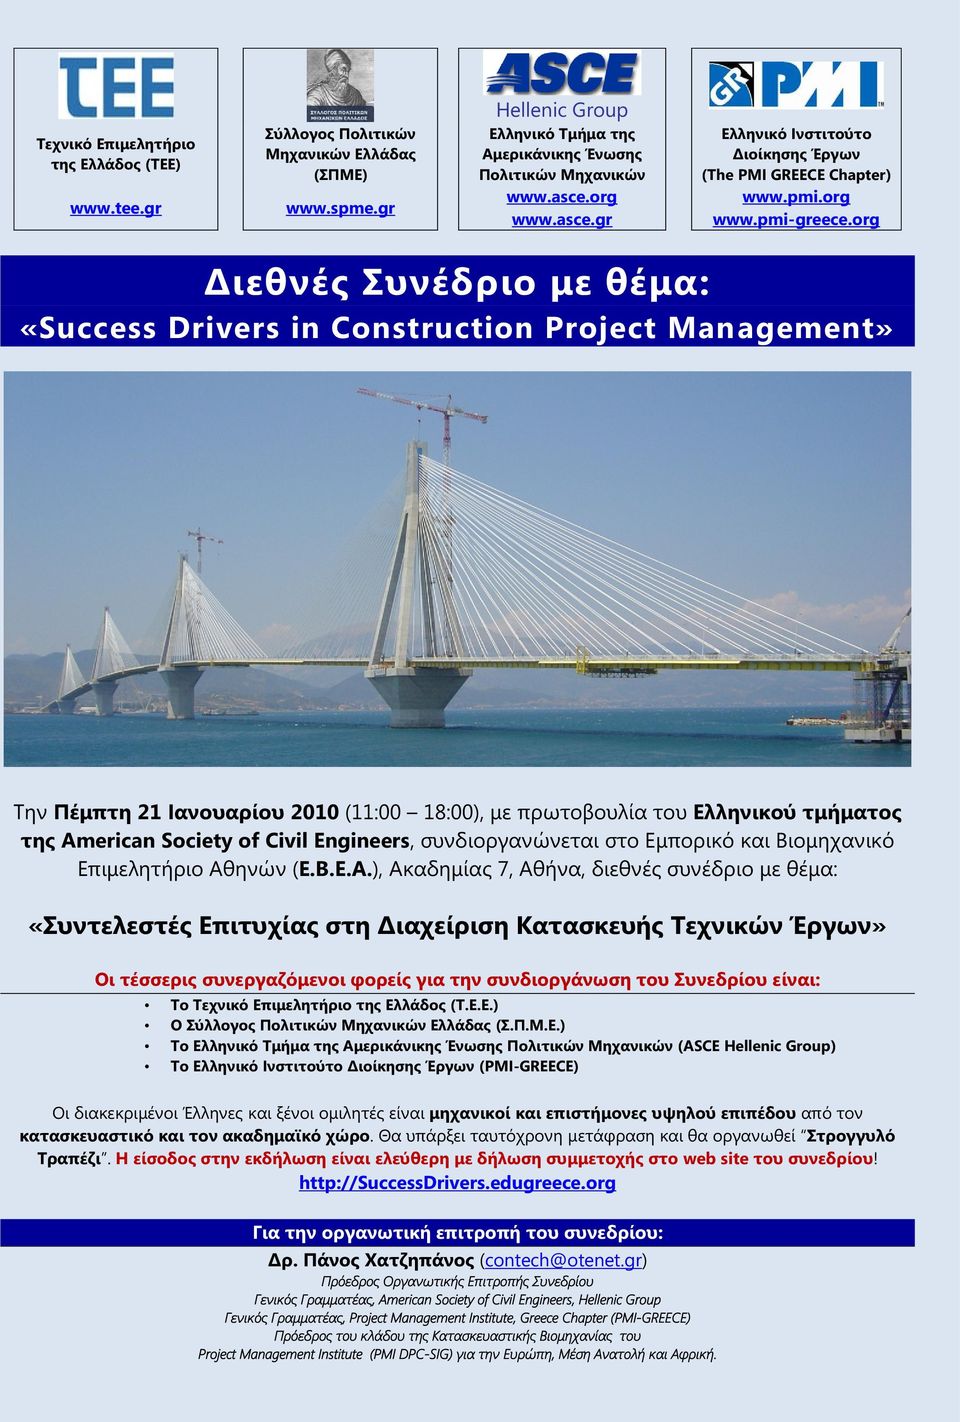 org Διεθνές Συνέδριο με θέμα: «Success Drivers in Construction Project Management» Την Πέμπτη 21 Ιανουαρίου 2010 (11:00 18:00), με πρωτοβουλία του Ελληνικού τμήματος της American Society of Civil